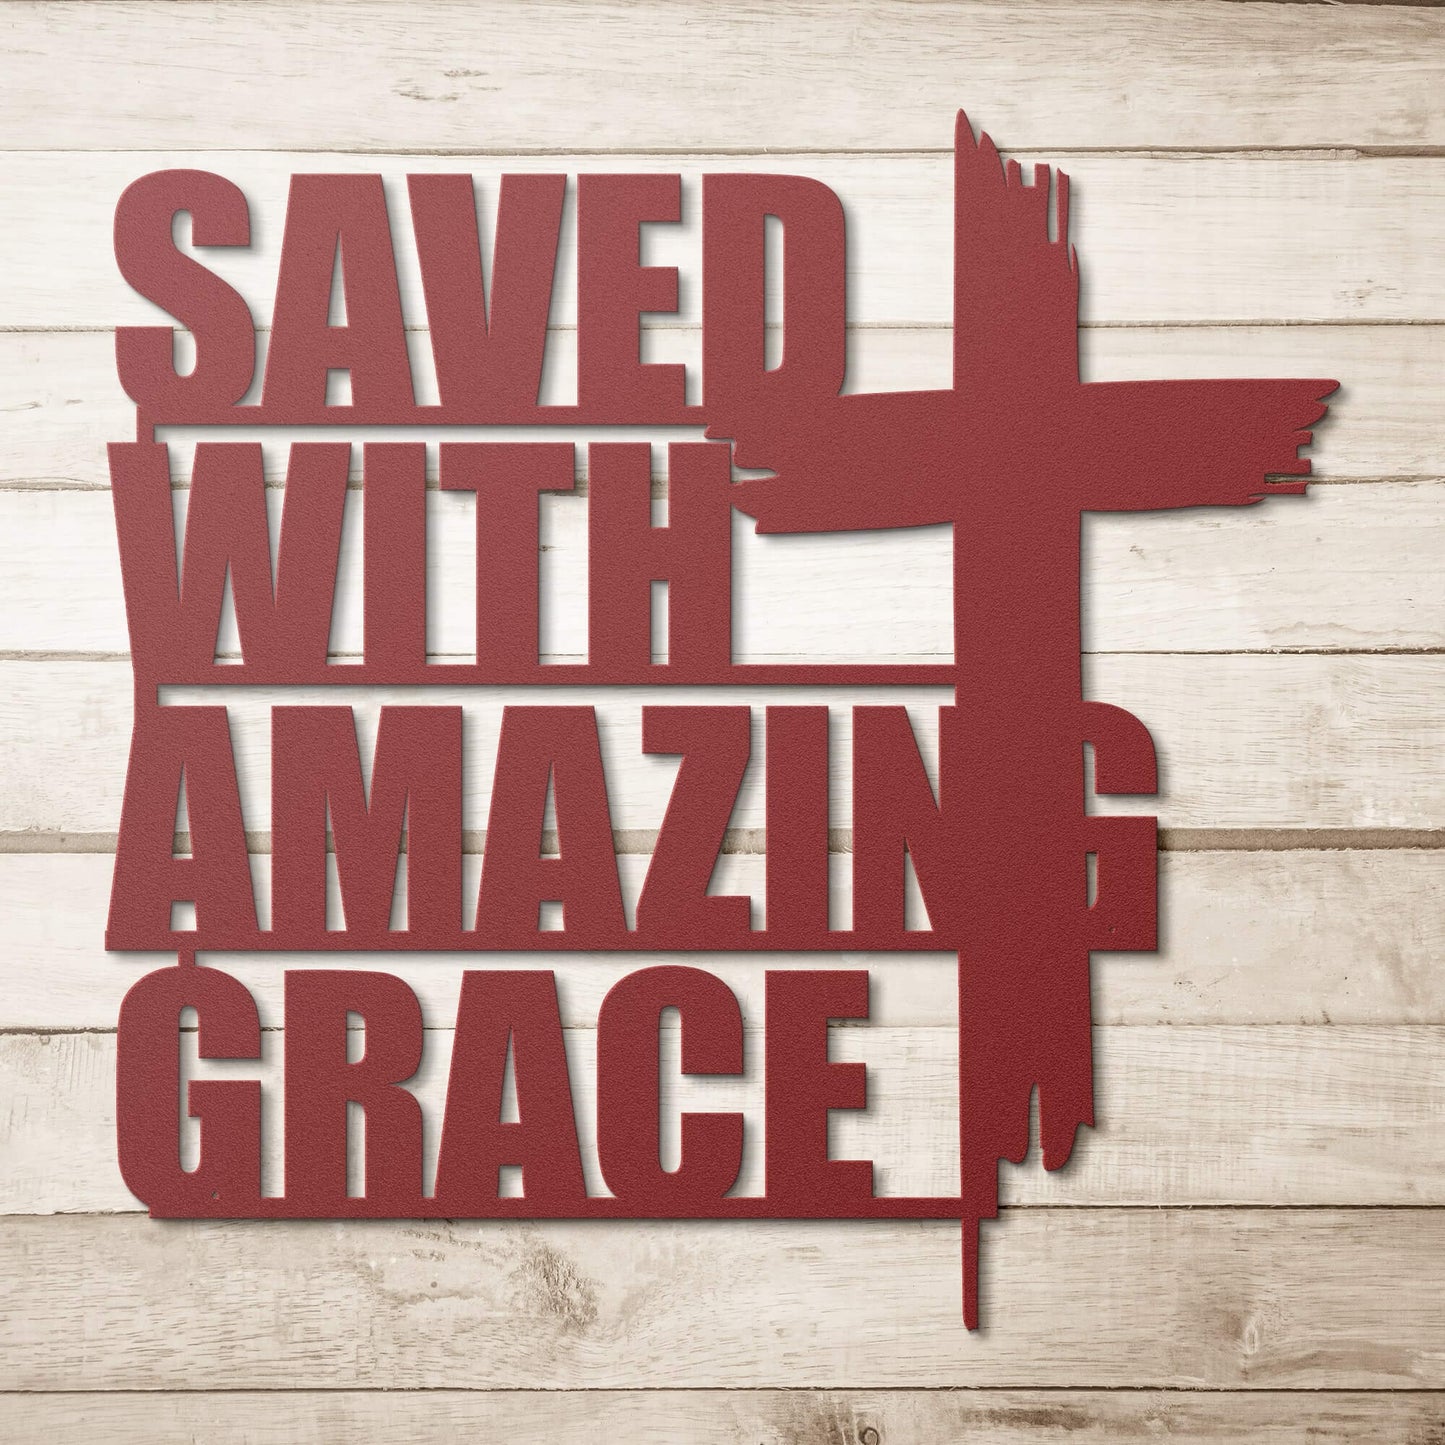 Saved With Amazing Grace Metal Sign - Christian Metal Wall Art - Religious Metal Wall Decor